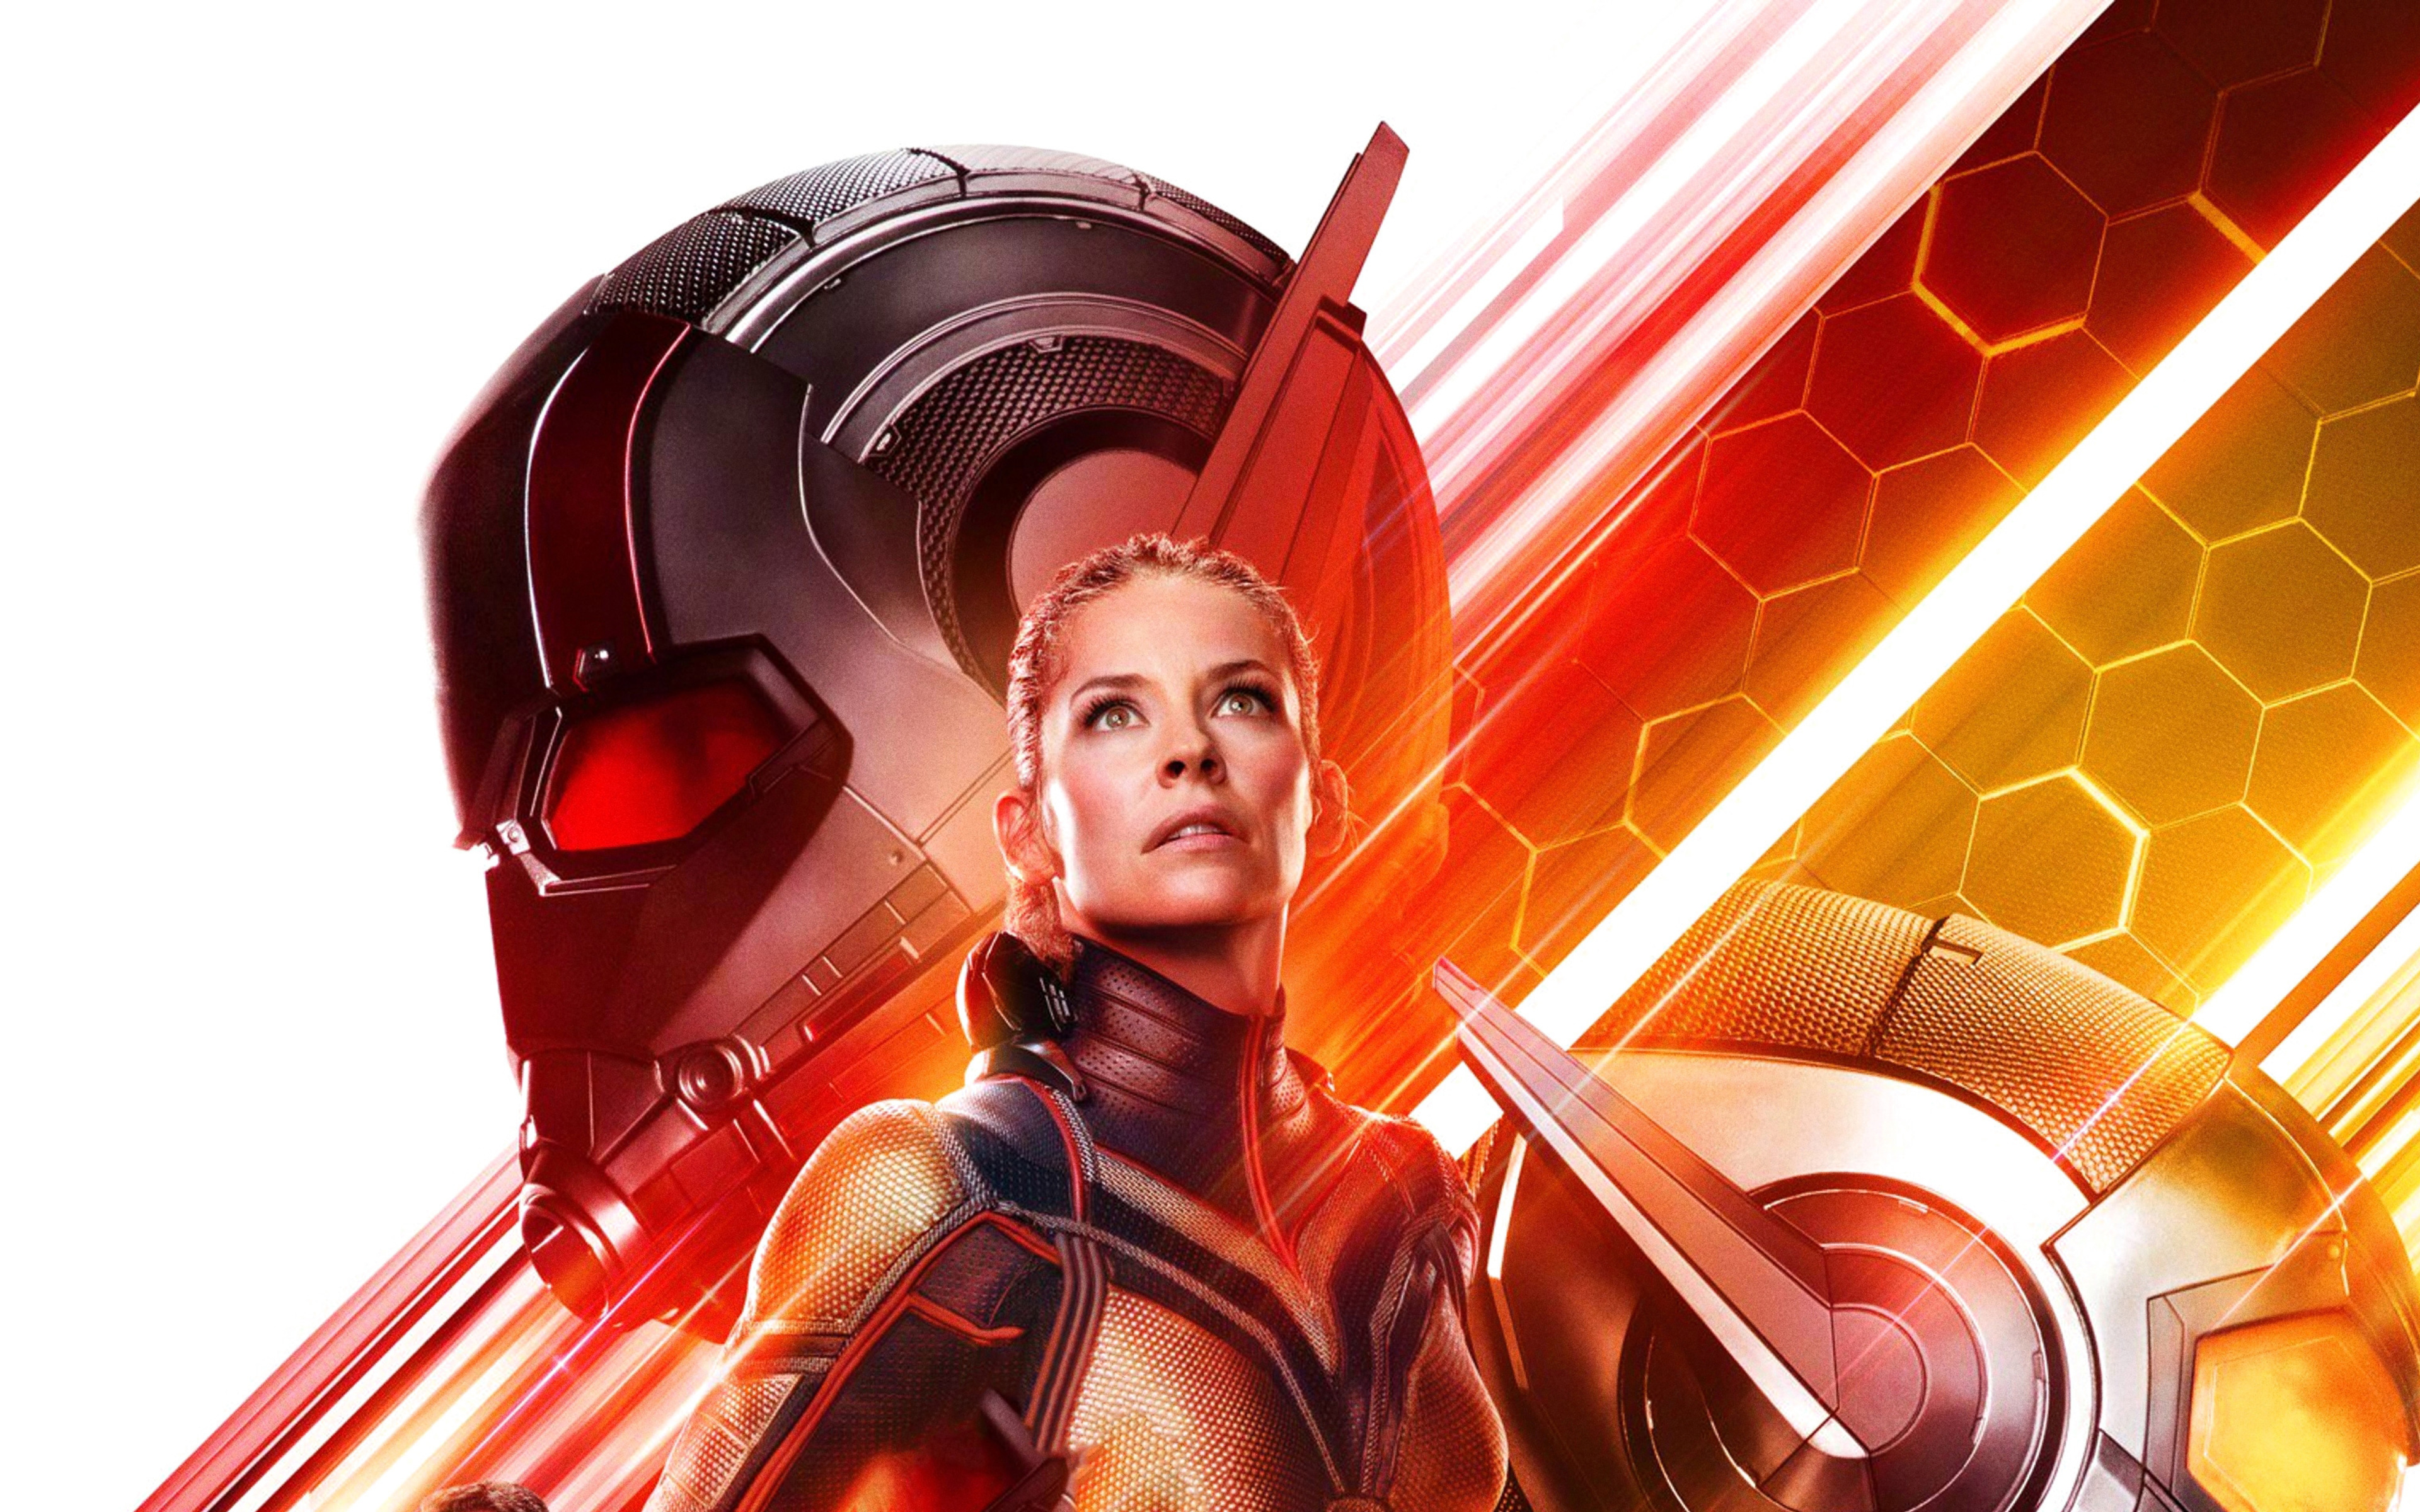 Download Wallpaper Ant Man, The Wasp, 4k, 2018 Movie, Superheroes, Hope Van Dyne, Ant Man And The Wasp, Evangeline Lilly For Desktop With Resolution 3840x2400. High Quality HD Picture Wallpaper